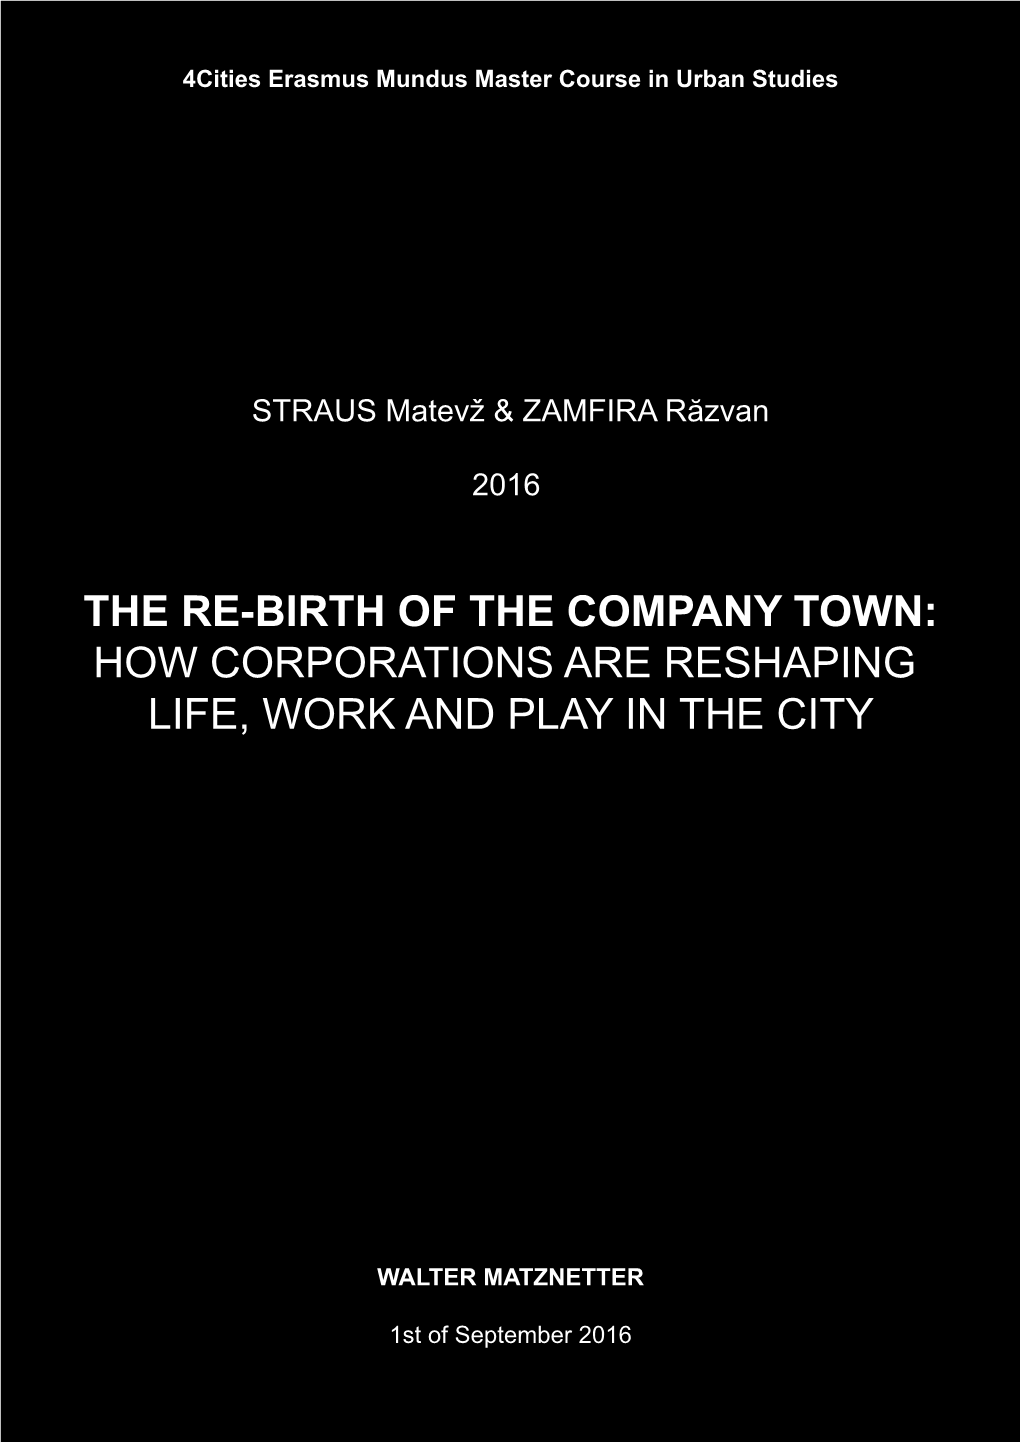 The Re-Birth of the Company Town: How Corporations Are Reshaping Life, Work and Play in the City